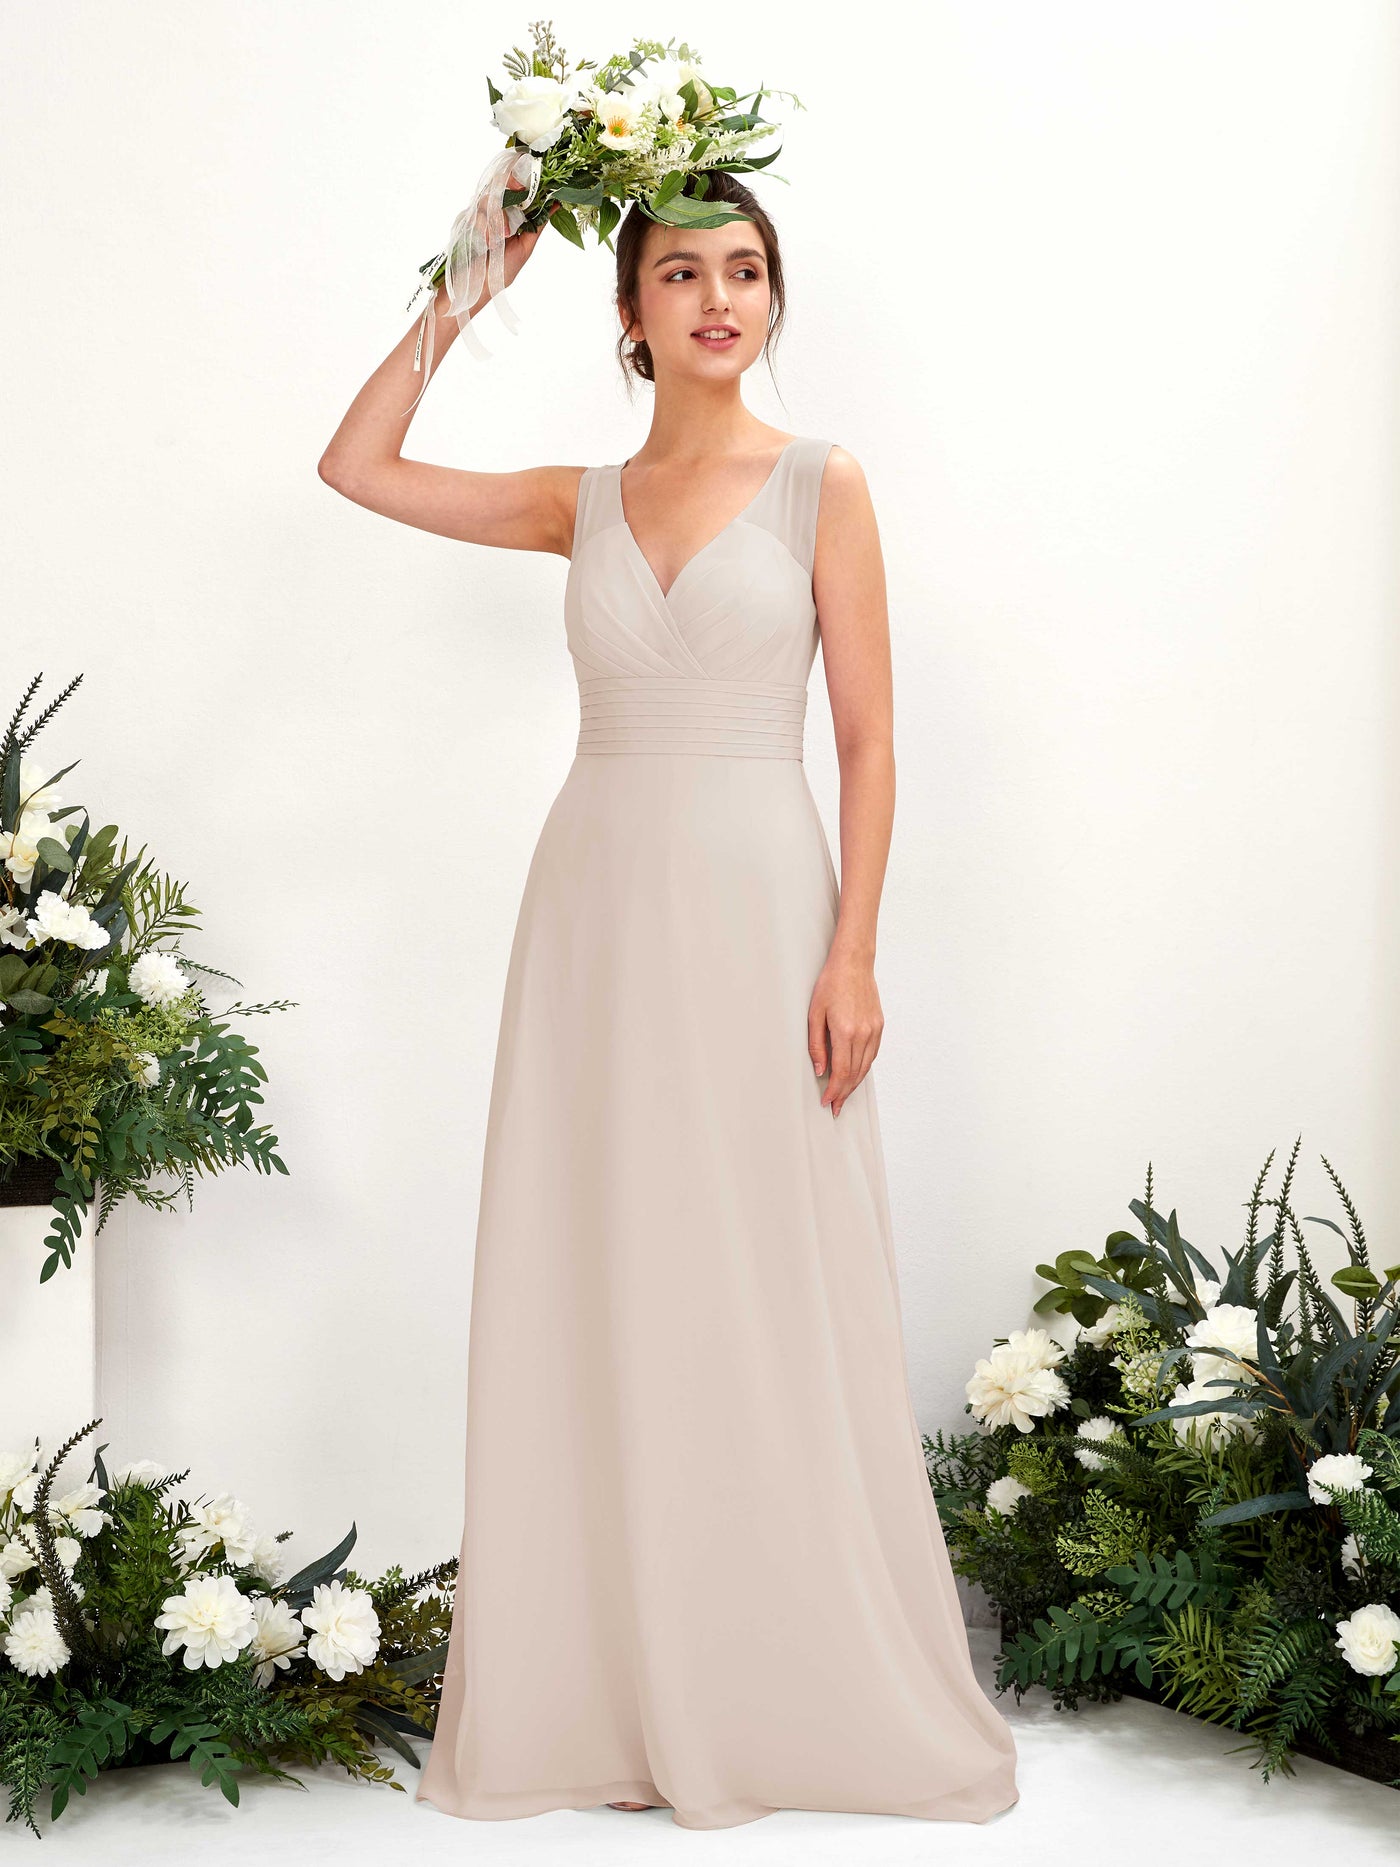 Champagne Bridesmaid Dresses Bridesmaid Dress A-line Chiffon Straps Full Length Sleeveless Wedding Party Dress (81220916)#color_champagne